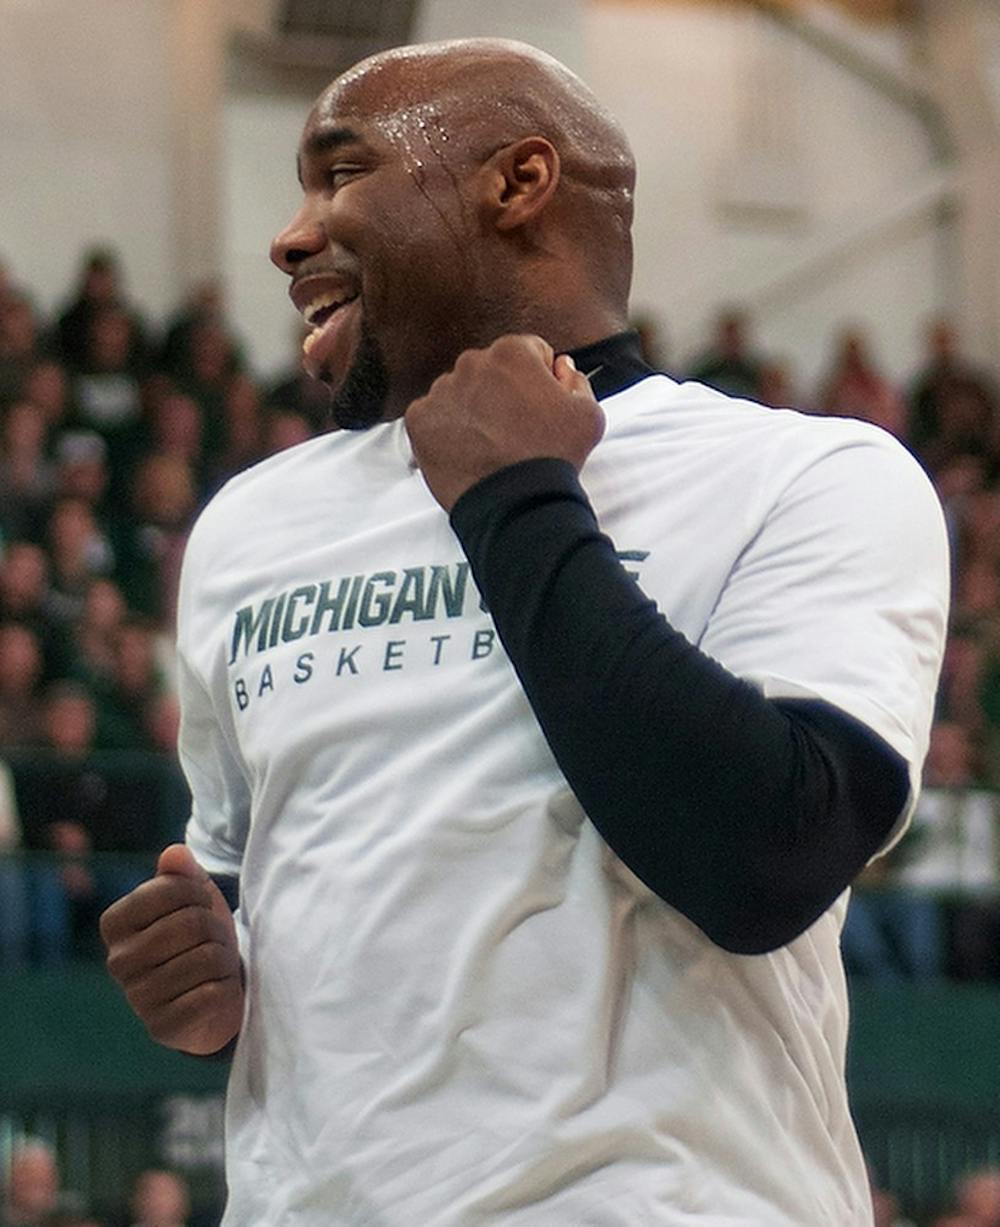 	<p>Former <span class="caps">MSU</span> guard Mateen Cleaves celebrates a point by dancing underneath the basket during the <span class="caps">MSU</span> men&#8217;s basketball alumni game Friday at Jenison Field House. Cleaves scored four points and dished out five assists during the game. Danyelle Morrow/The State News</p>